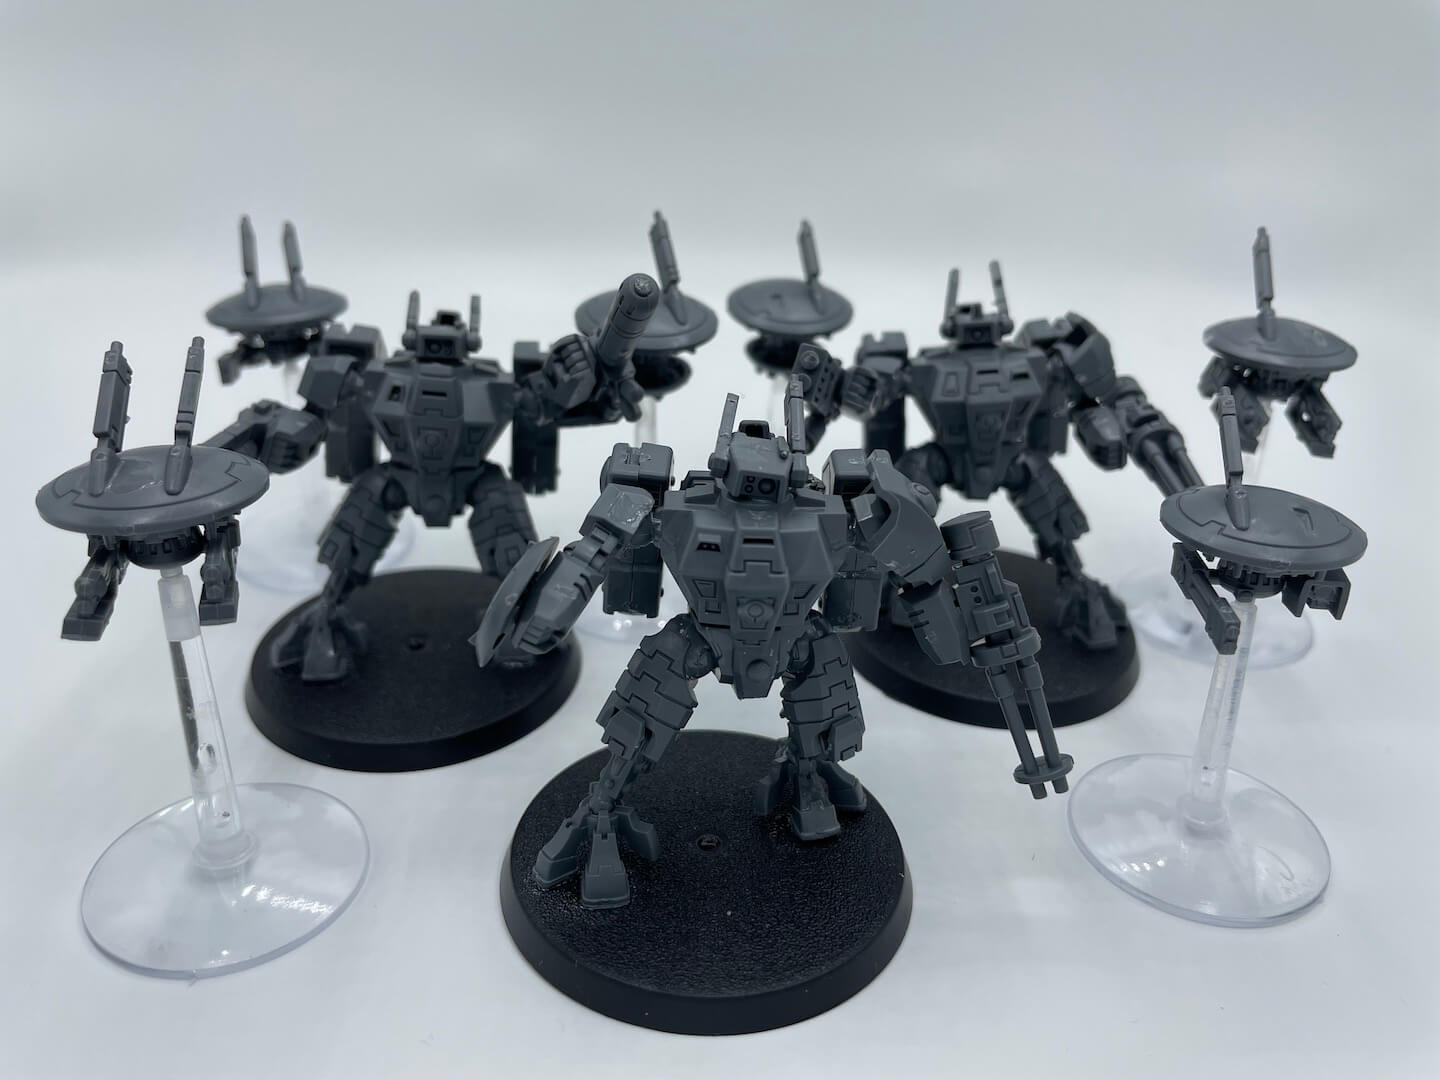 An image of the Warhammer 40K Boarding Patrol T'au Crisis Battlesuits, mech-style fighters with chunky square armor.